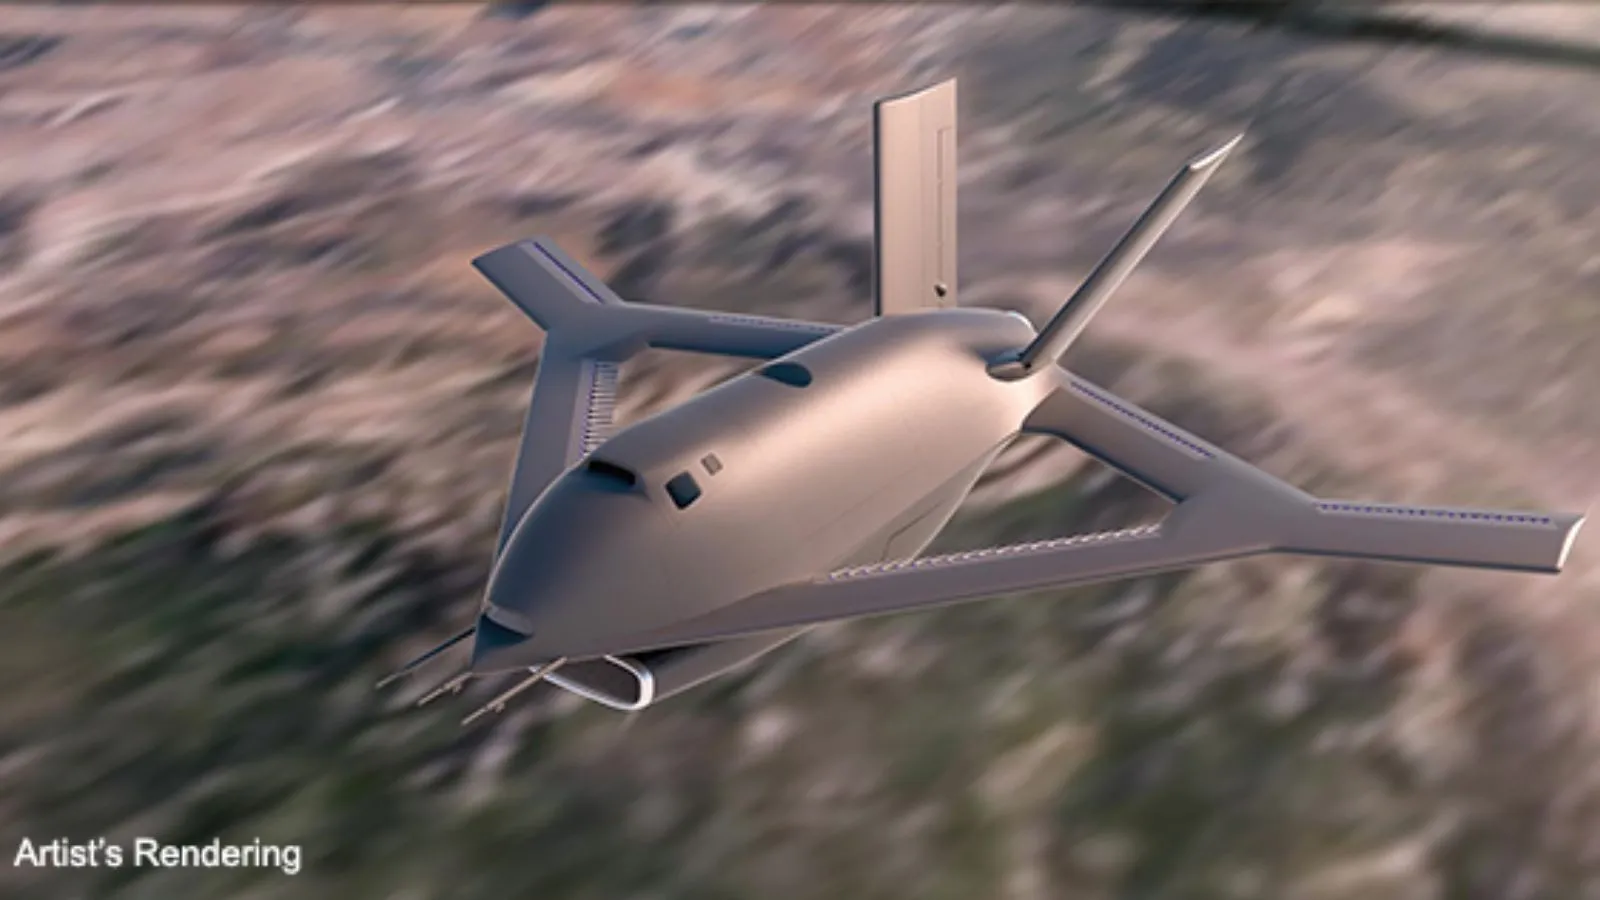 United States to test radical new X-65 aircraft with amazing controls